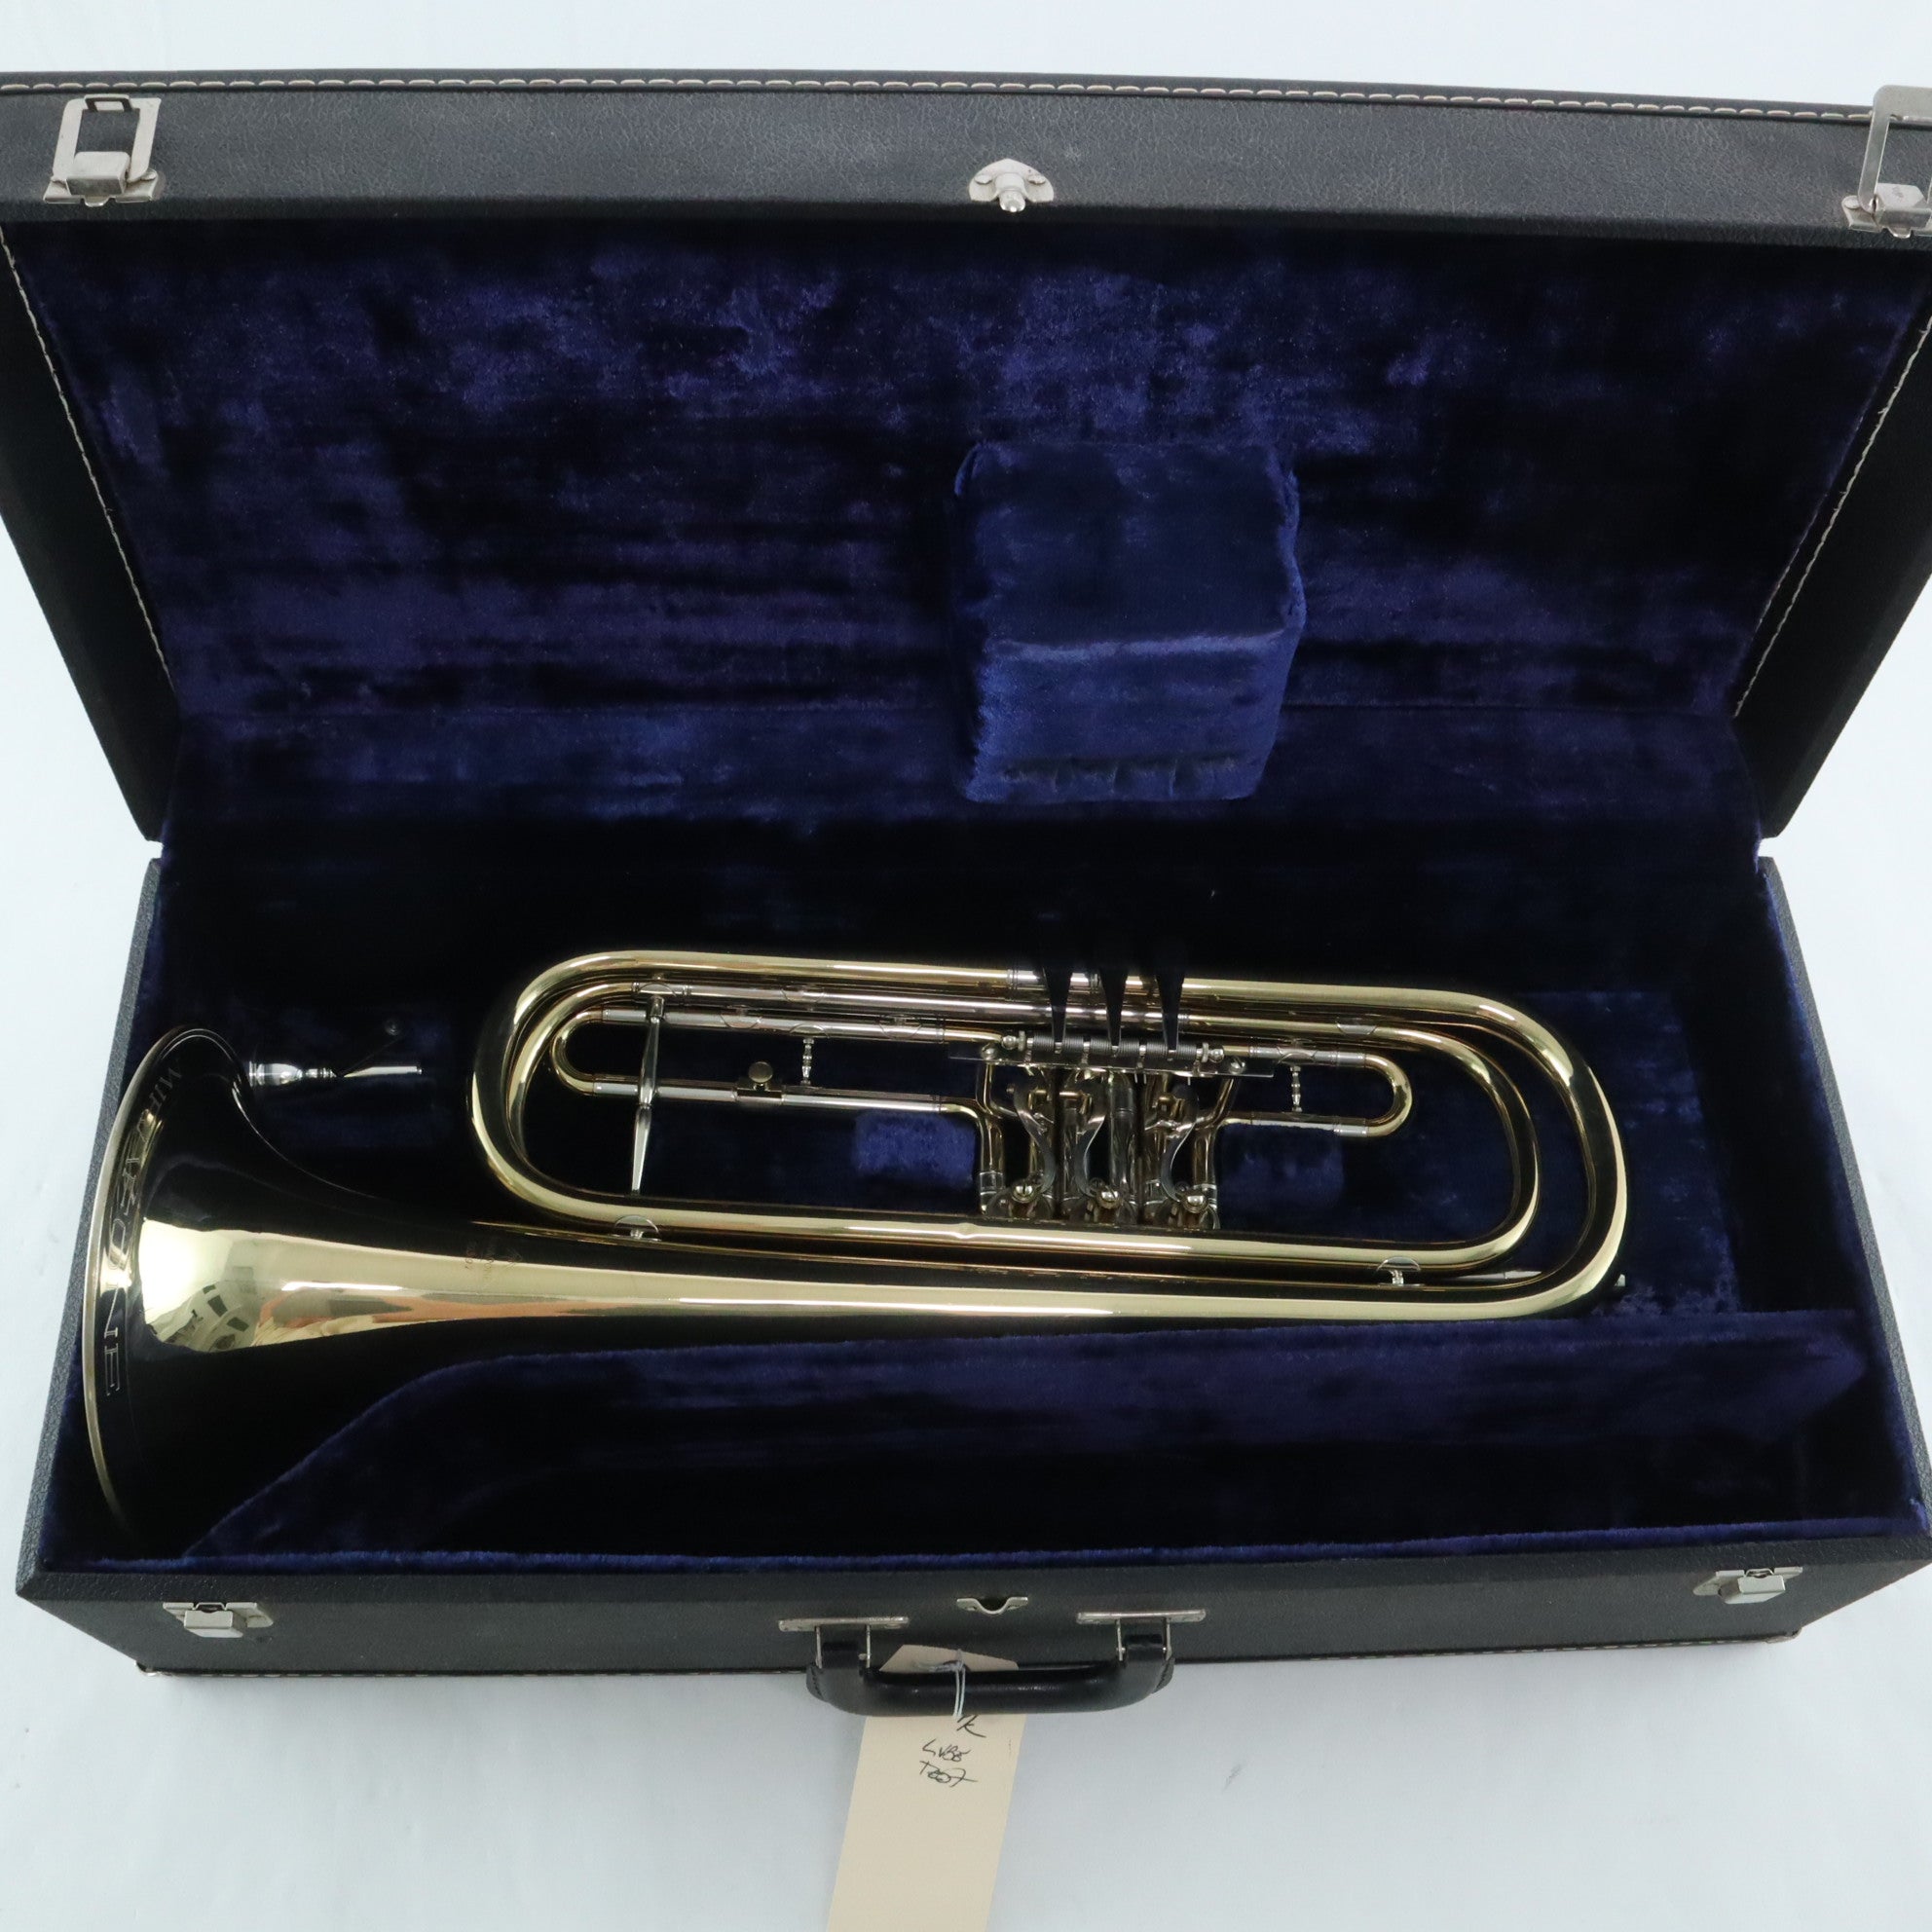 Miraphone Rotary Valve Bass Trumpet SN 155437 EXCELLENT – The Mighty Quinn  Brass and Winds